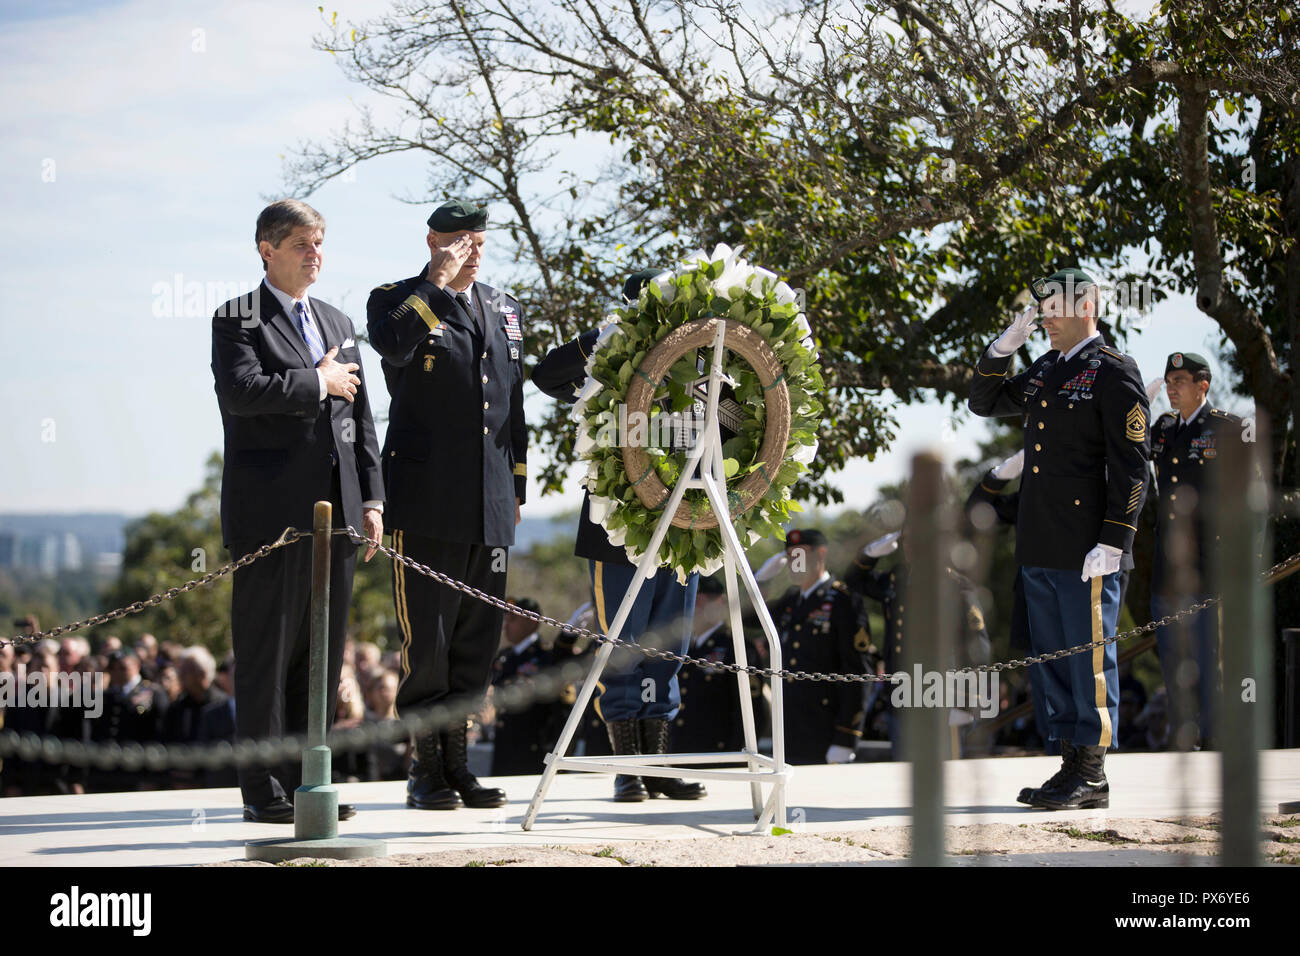 Dr. William Kennedy Smith, left, nephew of President John F. Kennedy joins U.S. Army Maj. Gen. John Deedrick, and Command Sgt. Maj. Tomas Sandoval, during a wreath ceremony at the gravesite of President Kennedy at Arlington National Cemetery October 17, 2018 in Arlington, Virginia. The annual ceremony pays tribute to vision of President Kennedy for creating a dedicated counter-insurgence force and his uncompromising support to the U.S. Green Berets. Stock Photo